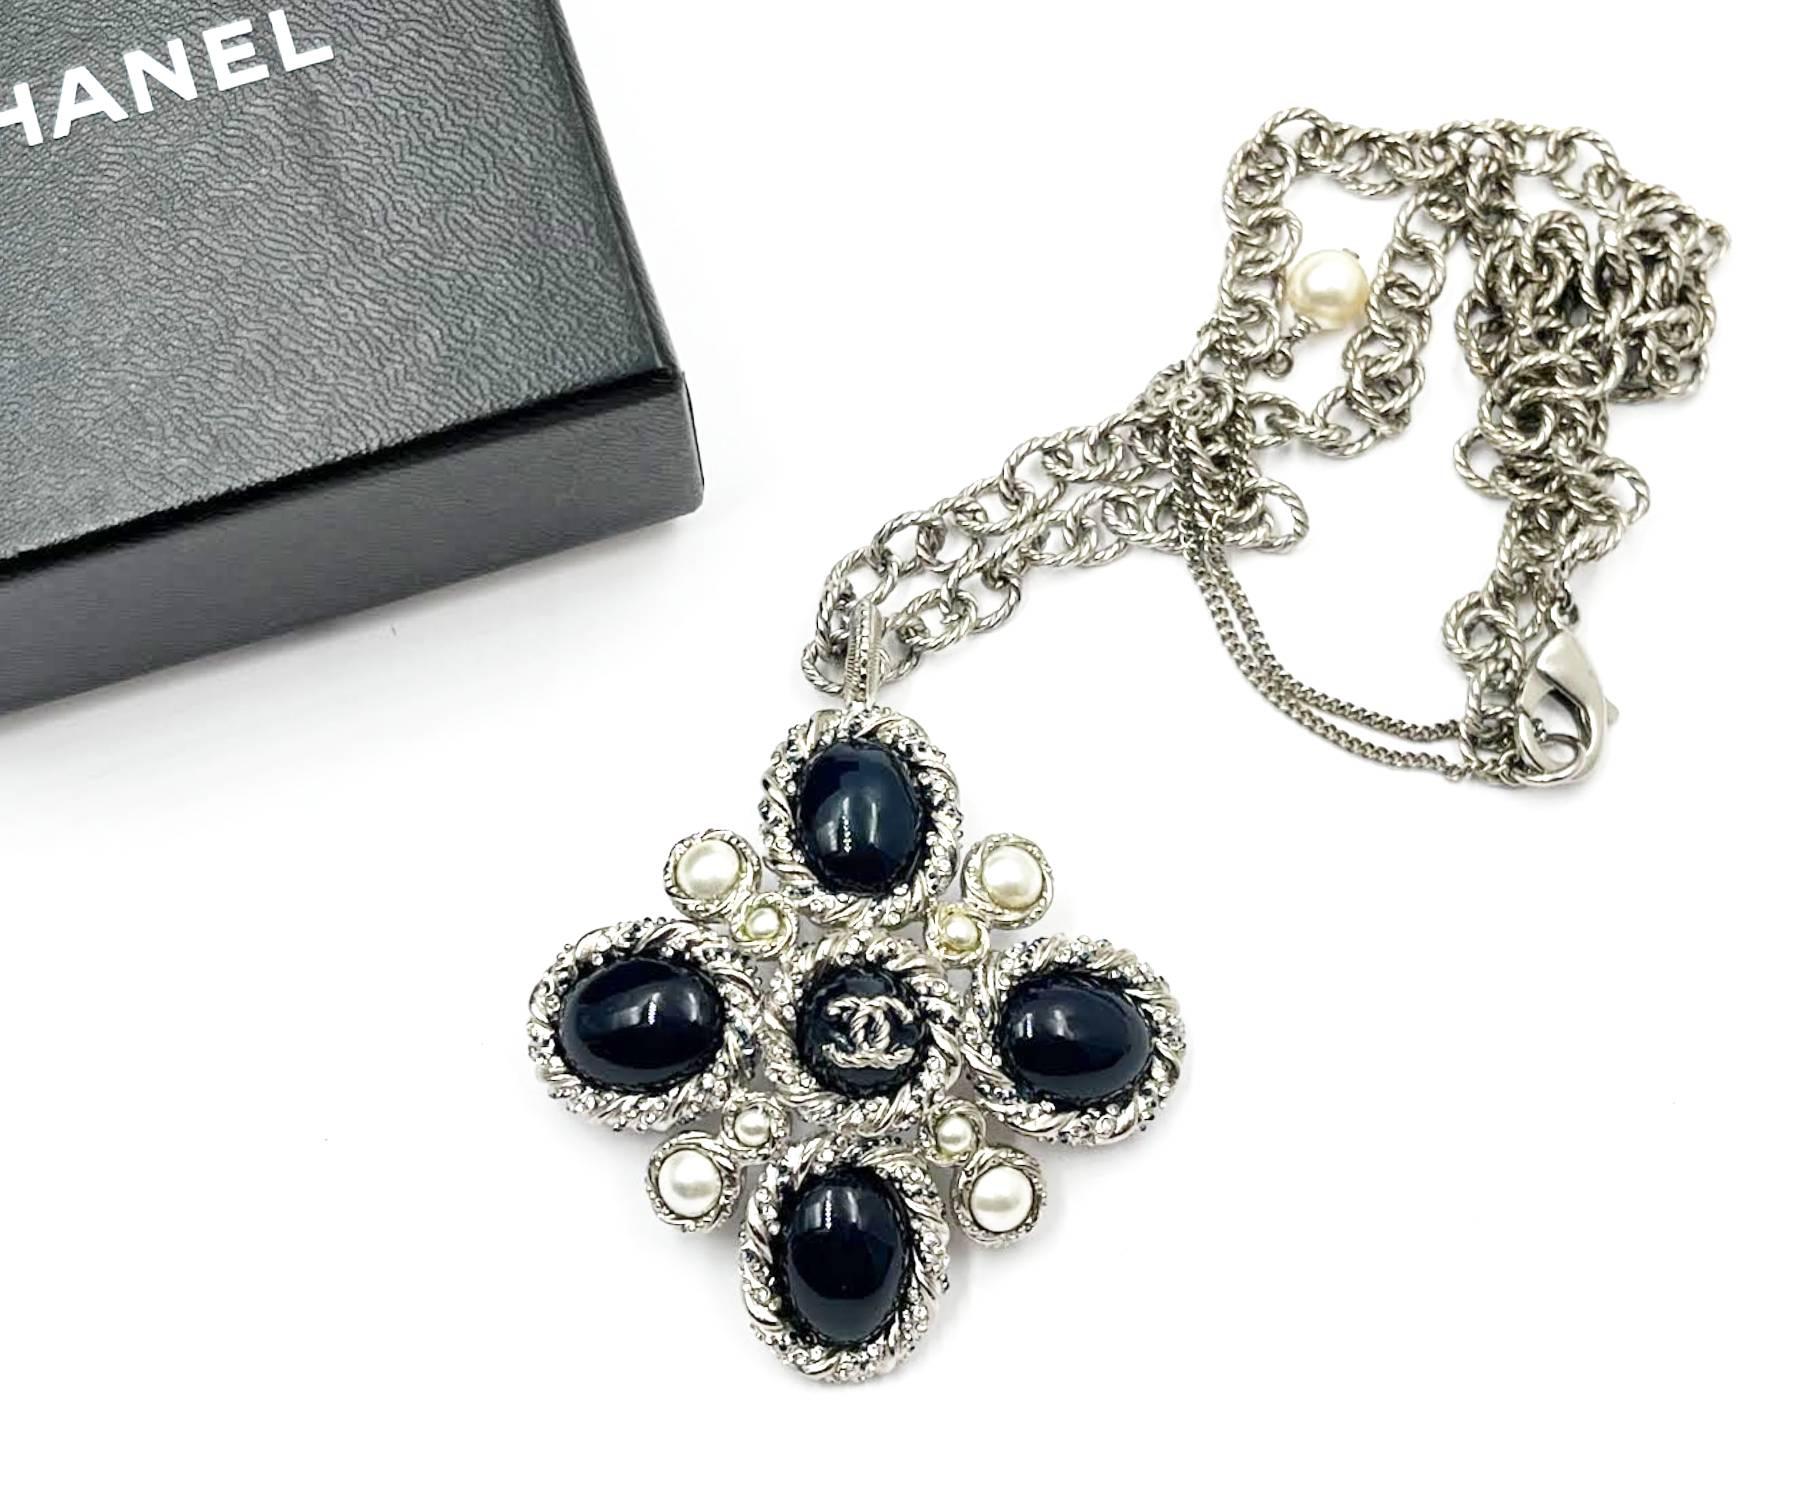 Chanel Silver Rope CC Navy Stone Cross Pendant Necklace

* Marked 13
* Made in Italy
* Comes with original box

-The pendant is approximately 2.5″ x 2.5″.
-The chain is approximately 23″.
-It is very classic.
-In a pristine condition.

AB5153-00405